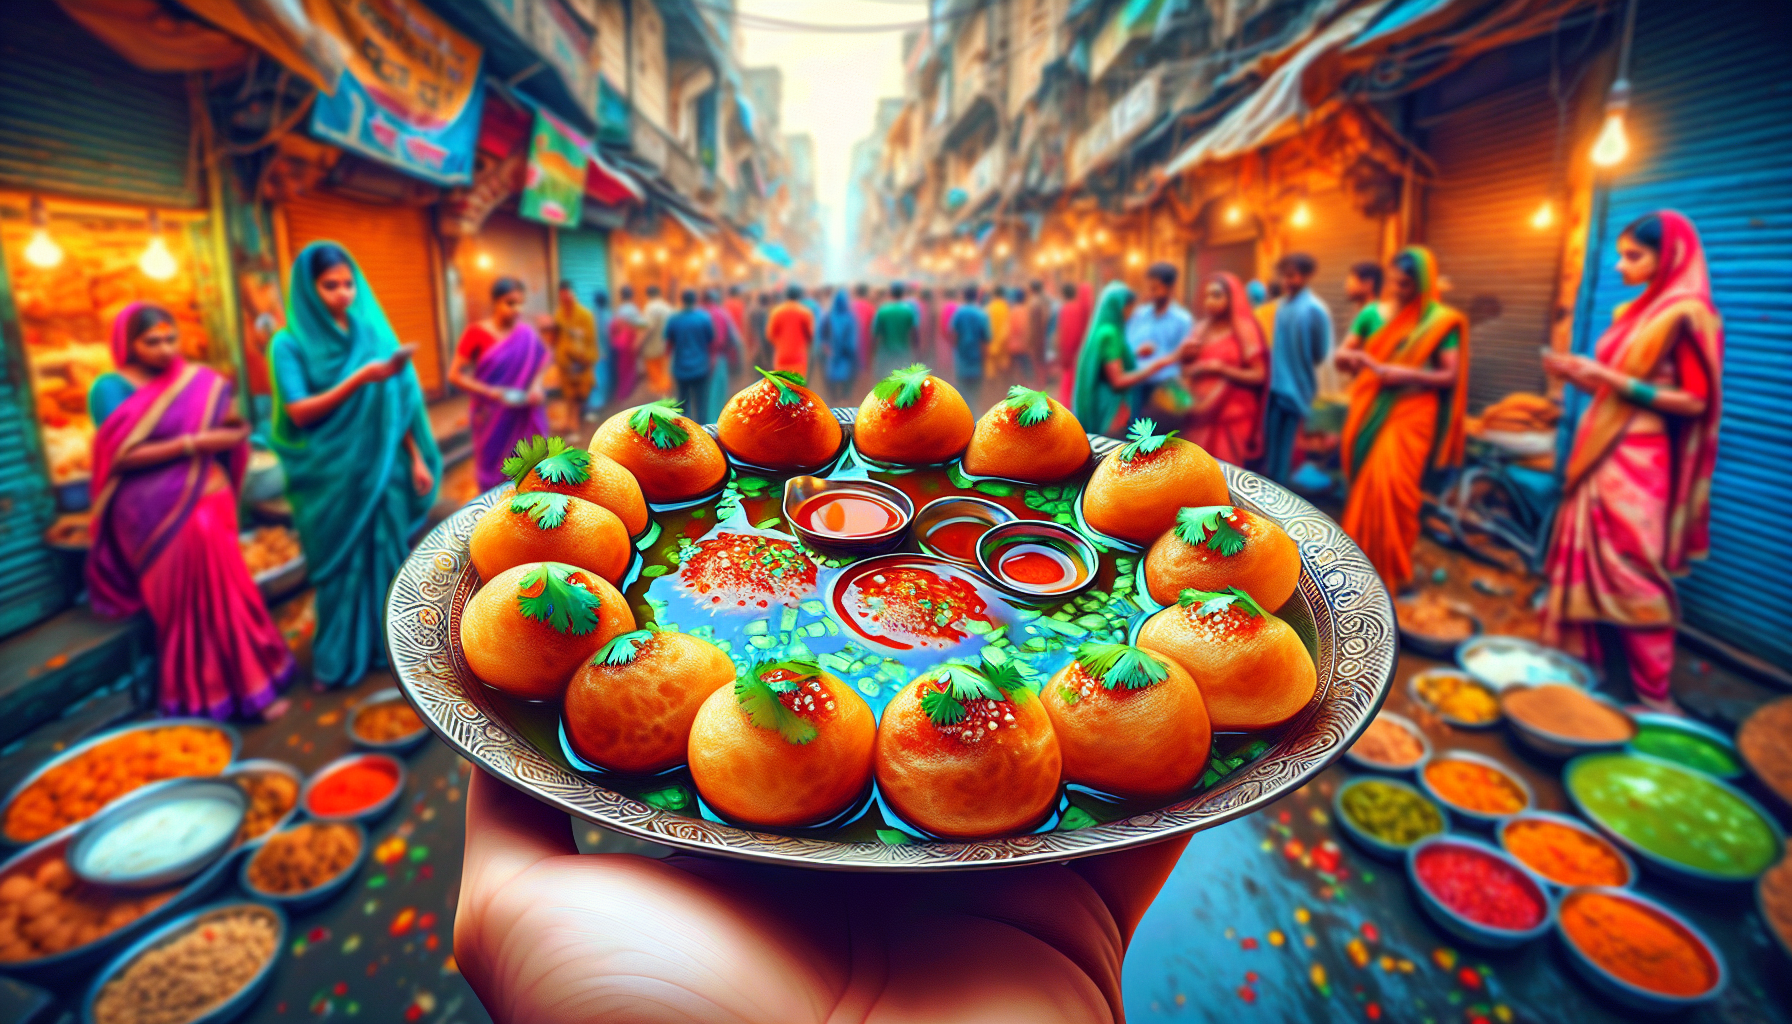 Whats Your Preferred Indian Street Food Snack For A Comforting Treat?